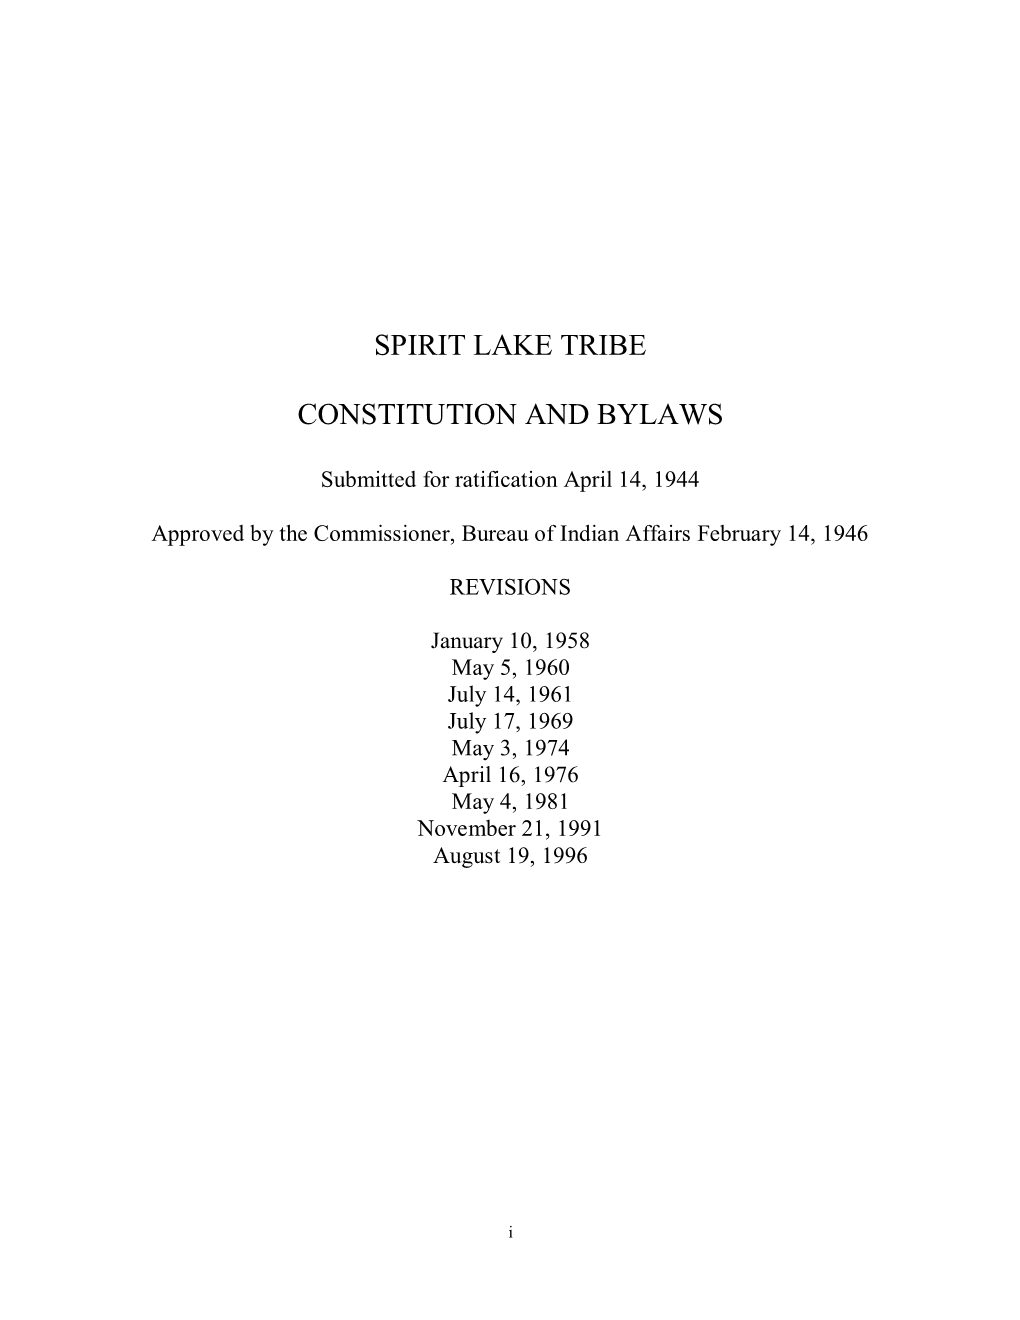 Spirit Lake Tribe Constitution and Bylaws